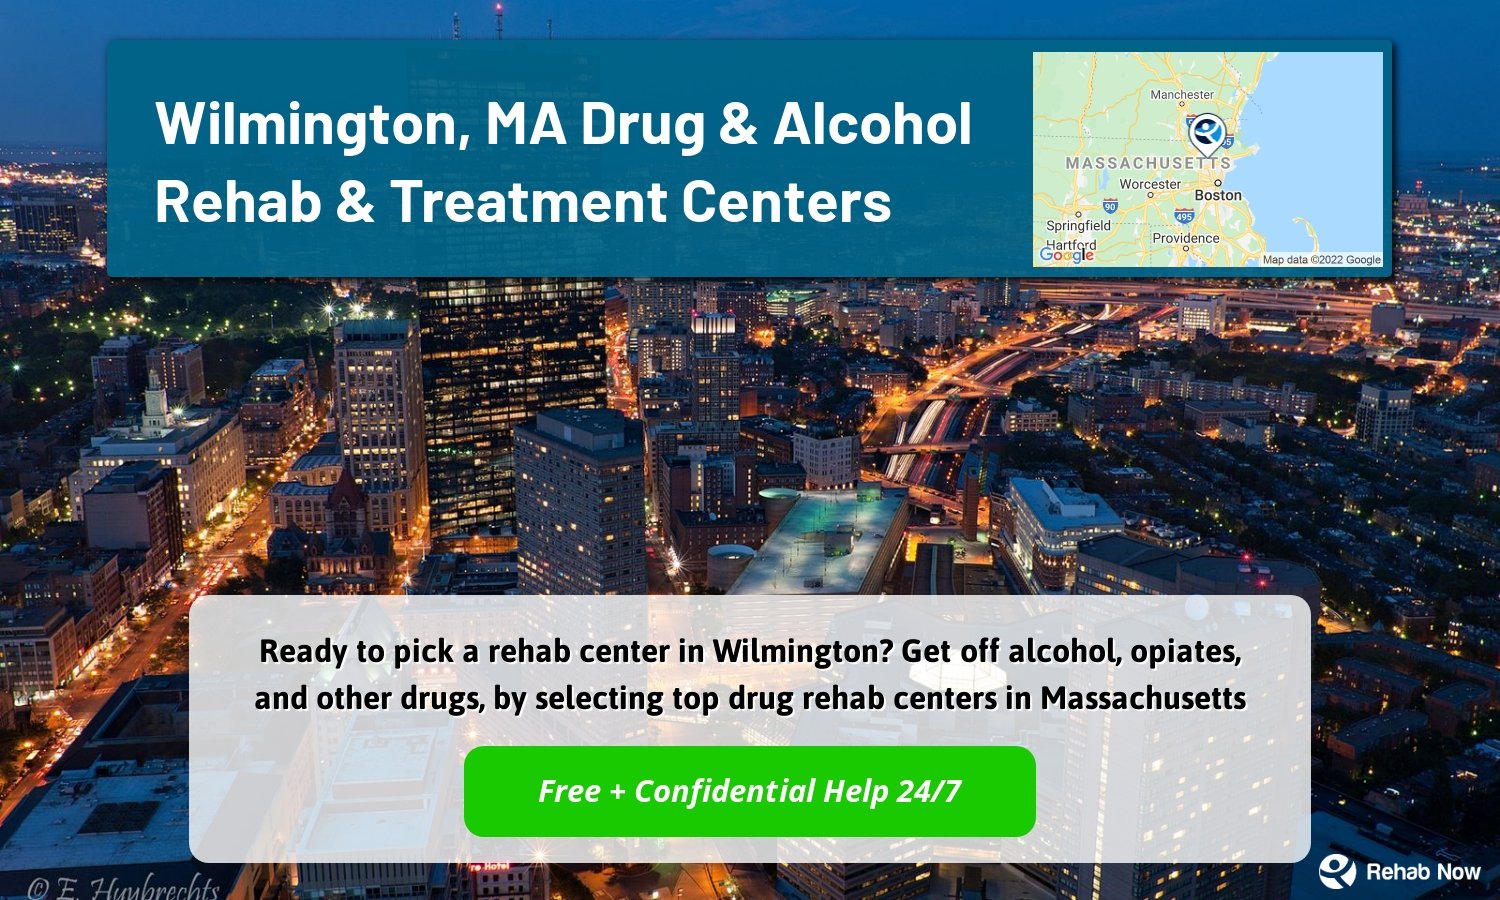 Ready to pick a rehab center in Wilmington? Get off alcohol, opiates, and other drugs, by selecting top drug rehab centers in Massachusetts